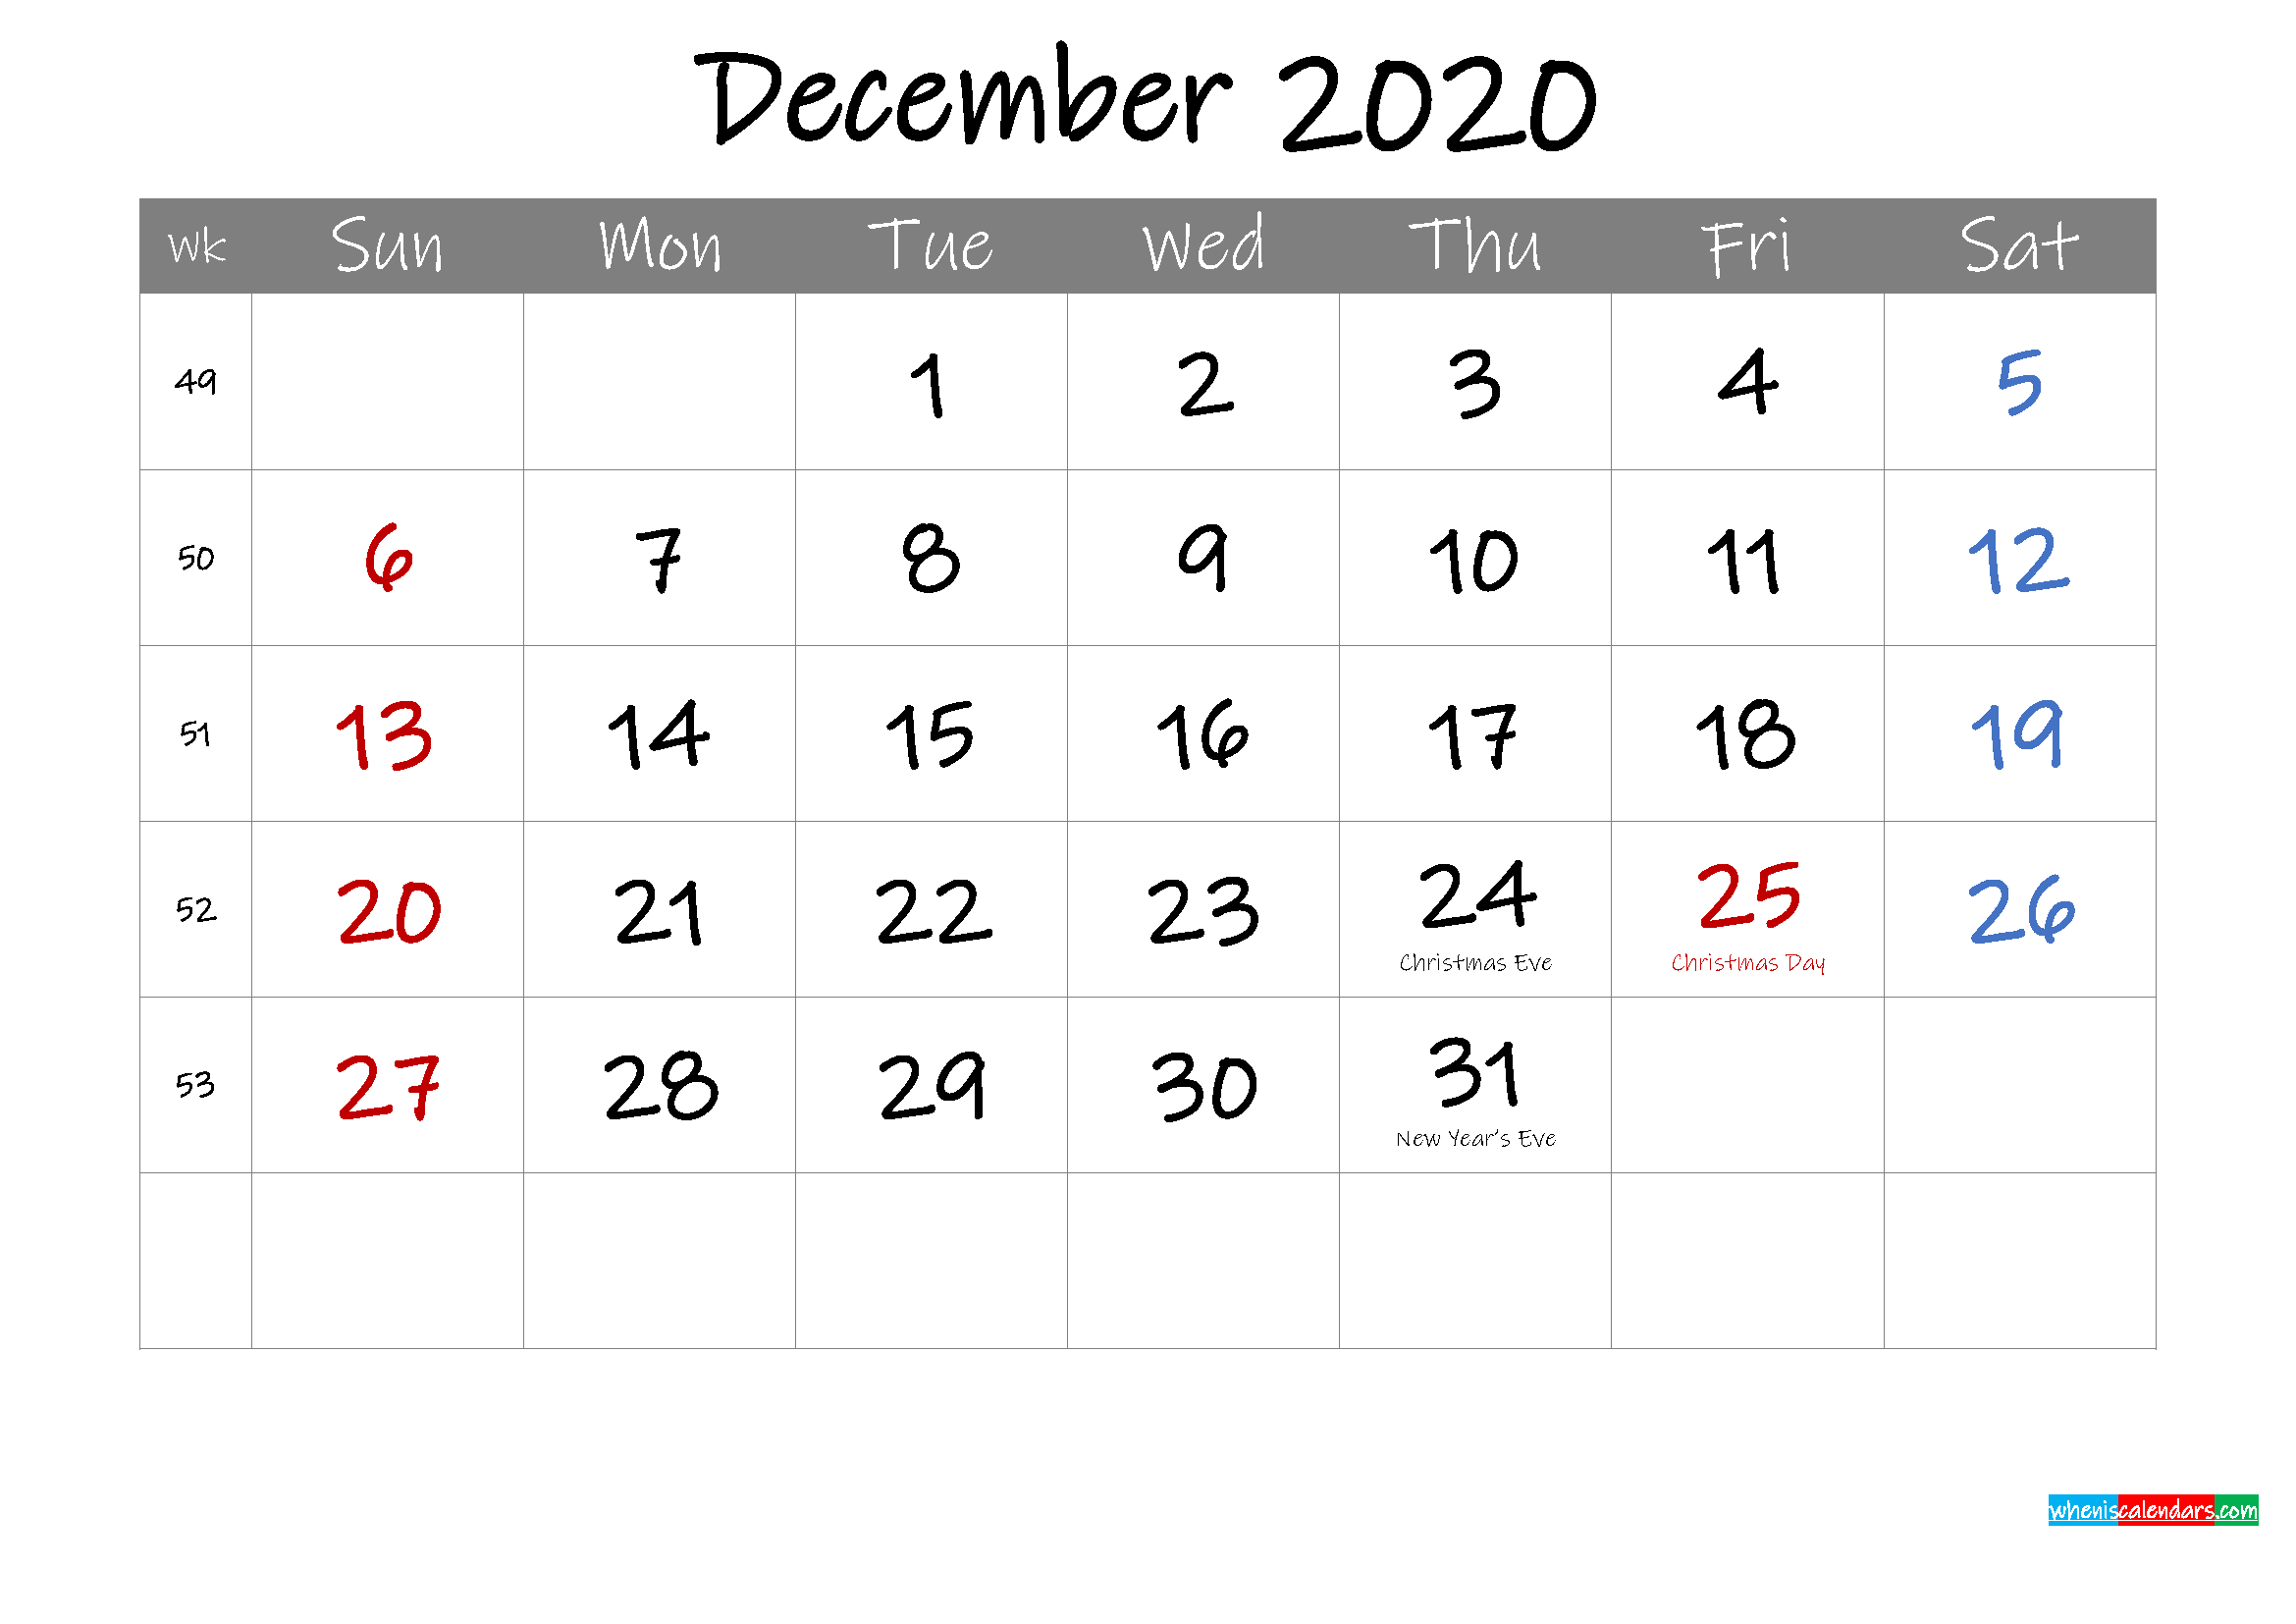 2025-calendar-with-us-holidays-editable-in-excel-word-pdf